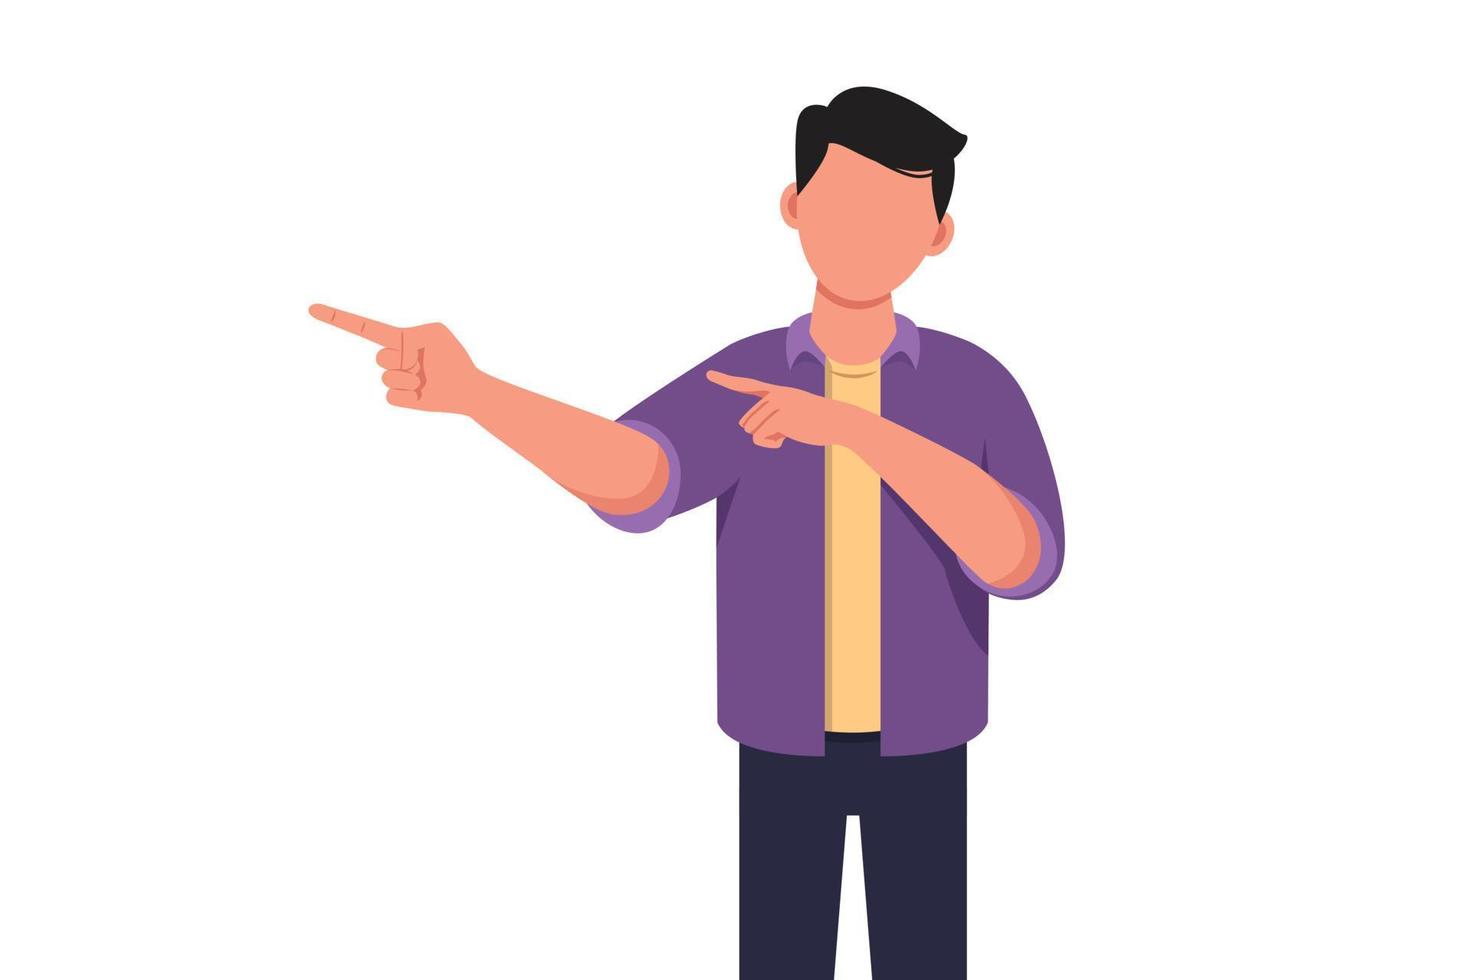 Business flat drawing young businessman pointing away hands together and showing or presenting something while standing and smiling. Emotion and body language. Cartoon style design vector illustration